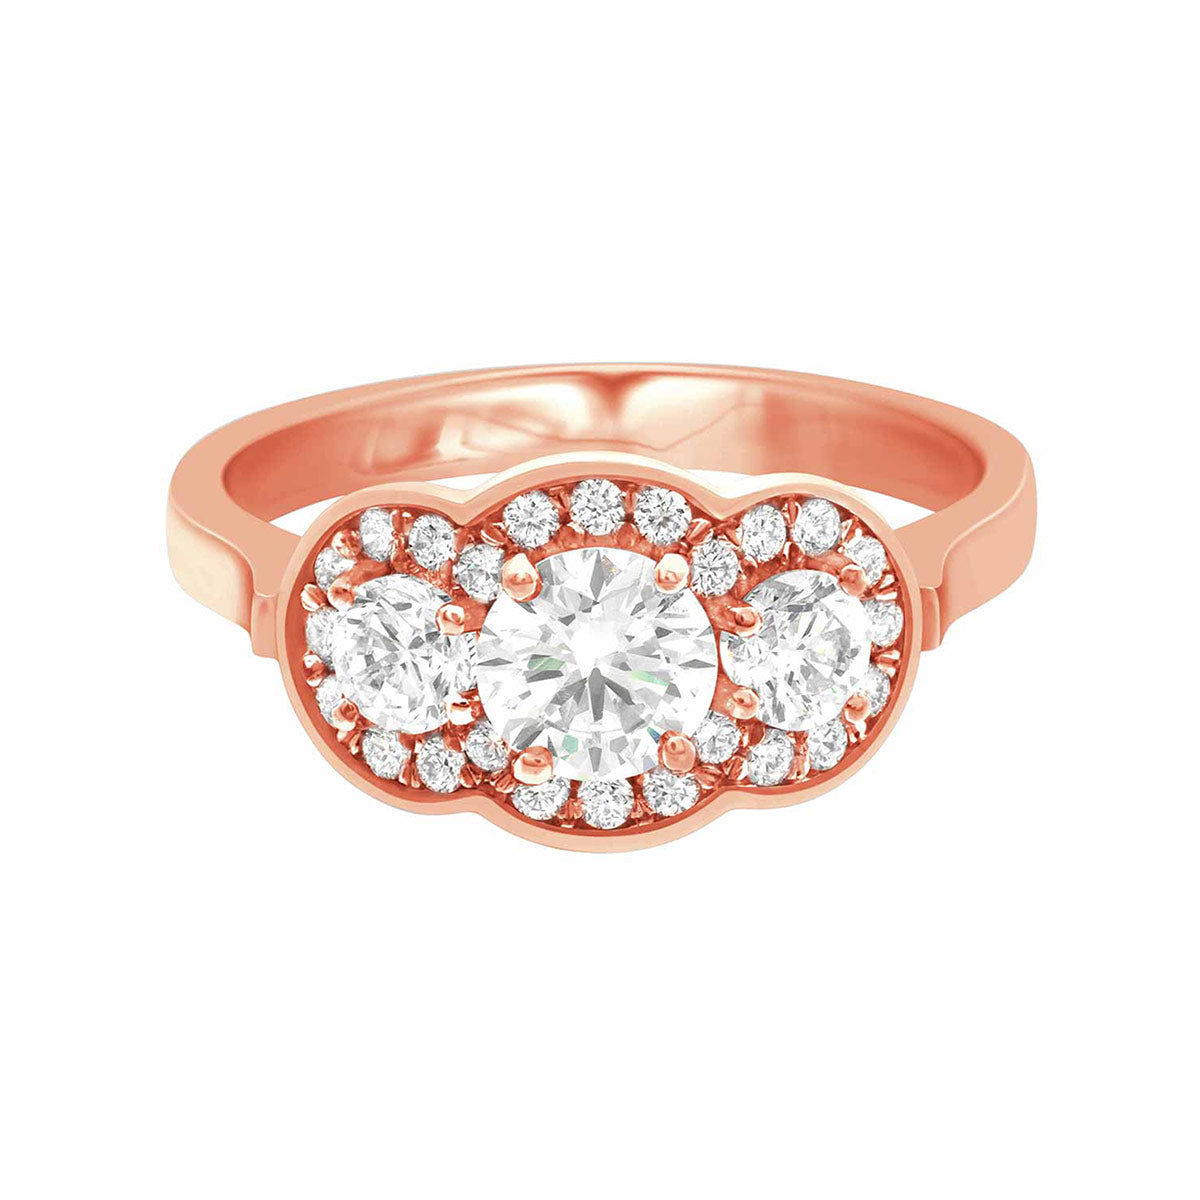 Three Halo Engagement Ring in rose gold, lying flat with a white background